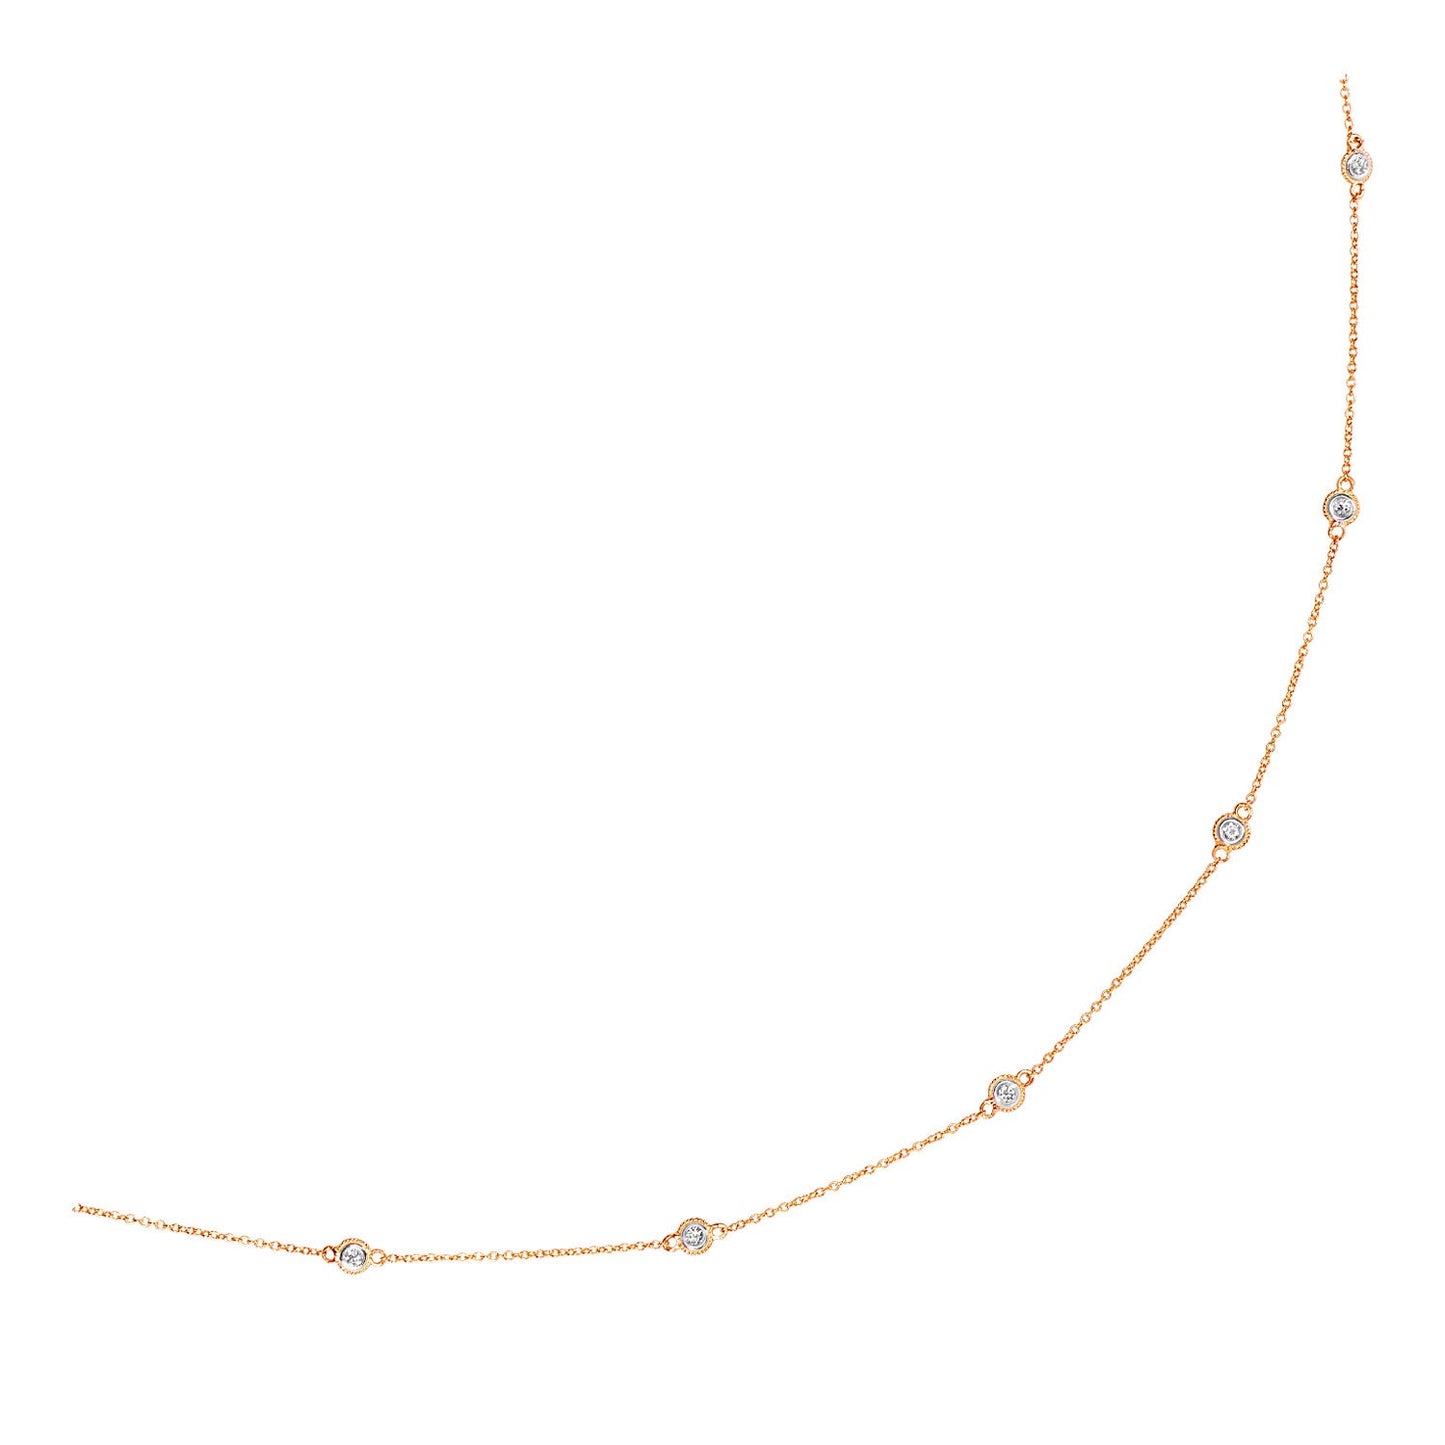 14k Rose Gold Station Necklace with Round Diamonds